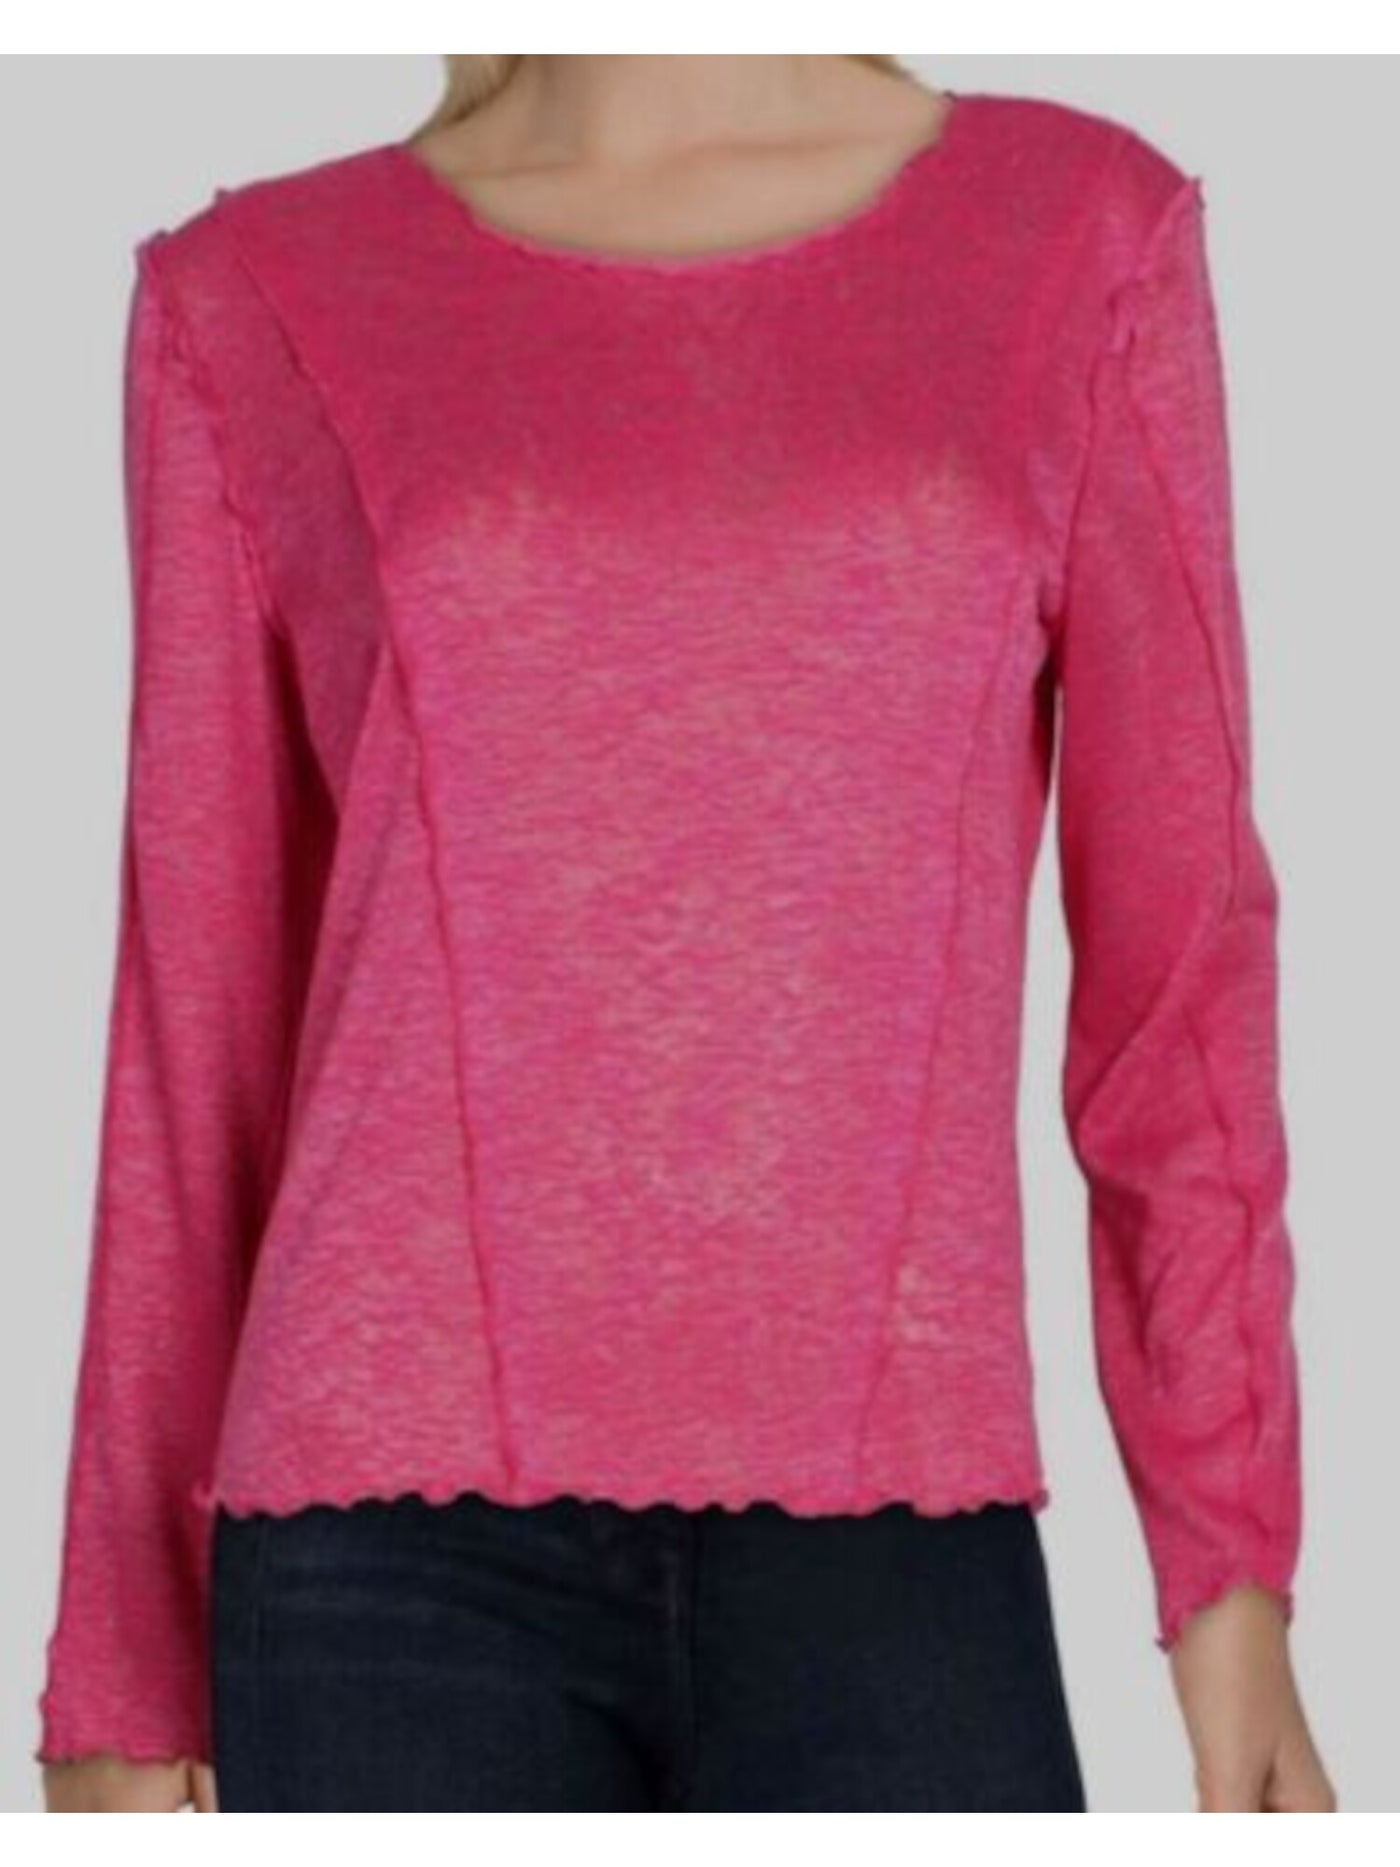 B NEW YORK Womens Pink Stretch Scalloped Seam Detail Heather Long Sleeve Round Neck Top XL